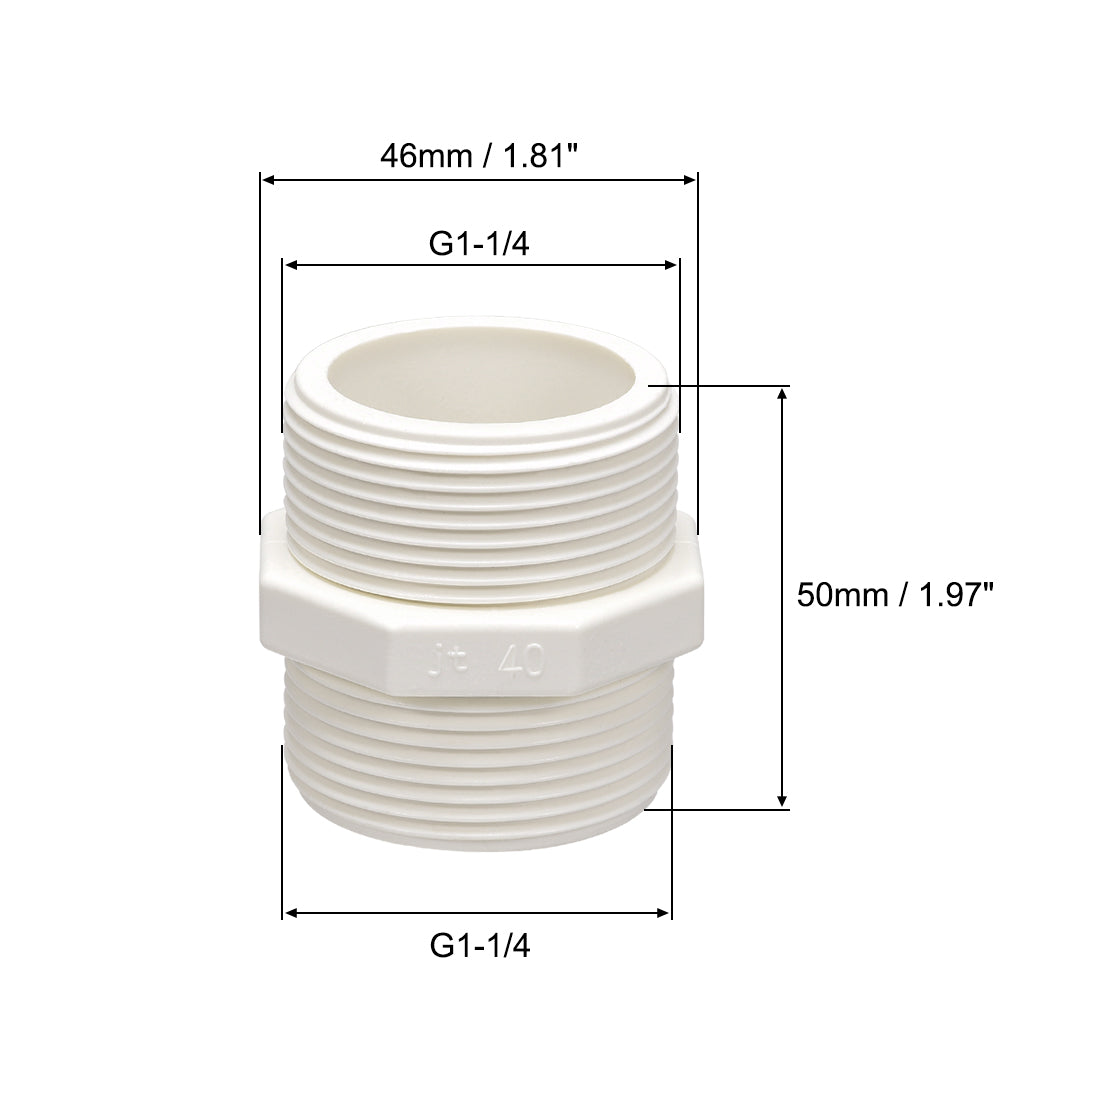 uxcell Uxcell PVC Pipe Fitting Hex Nipple G1-1/4 x G1-1/4 Male Thread Adapter Connector 2pcs